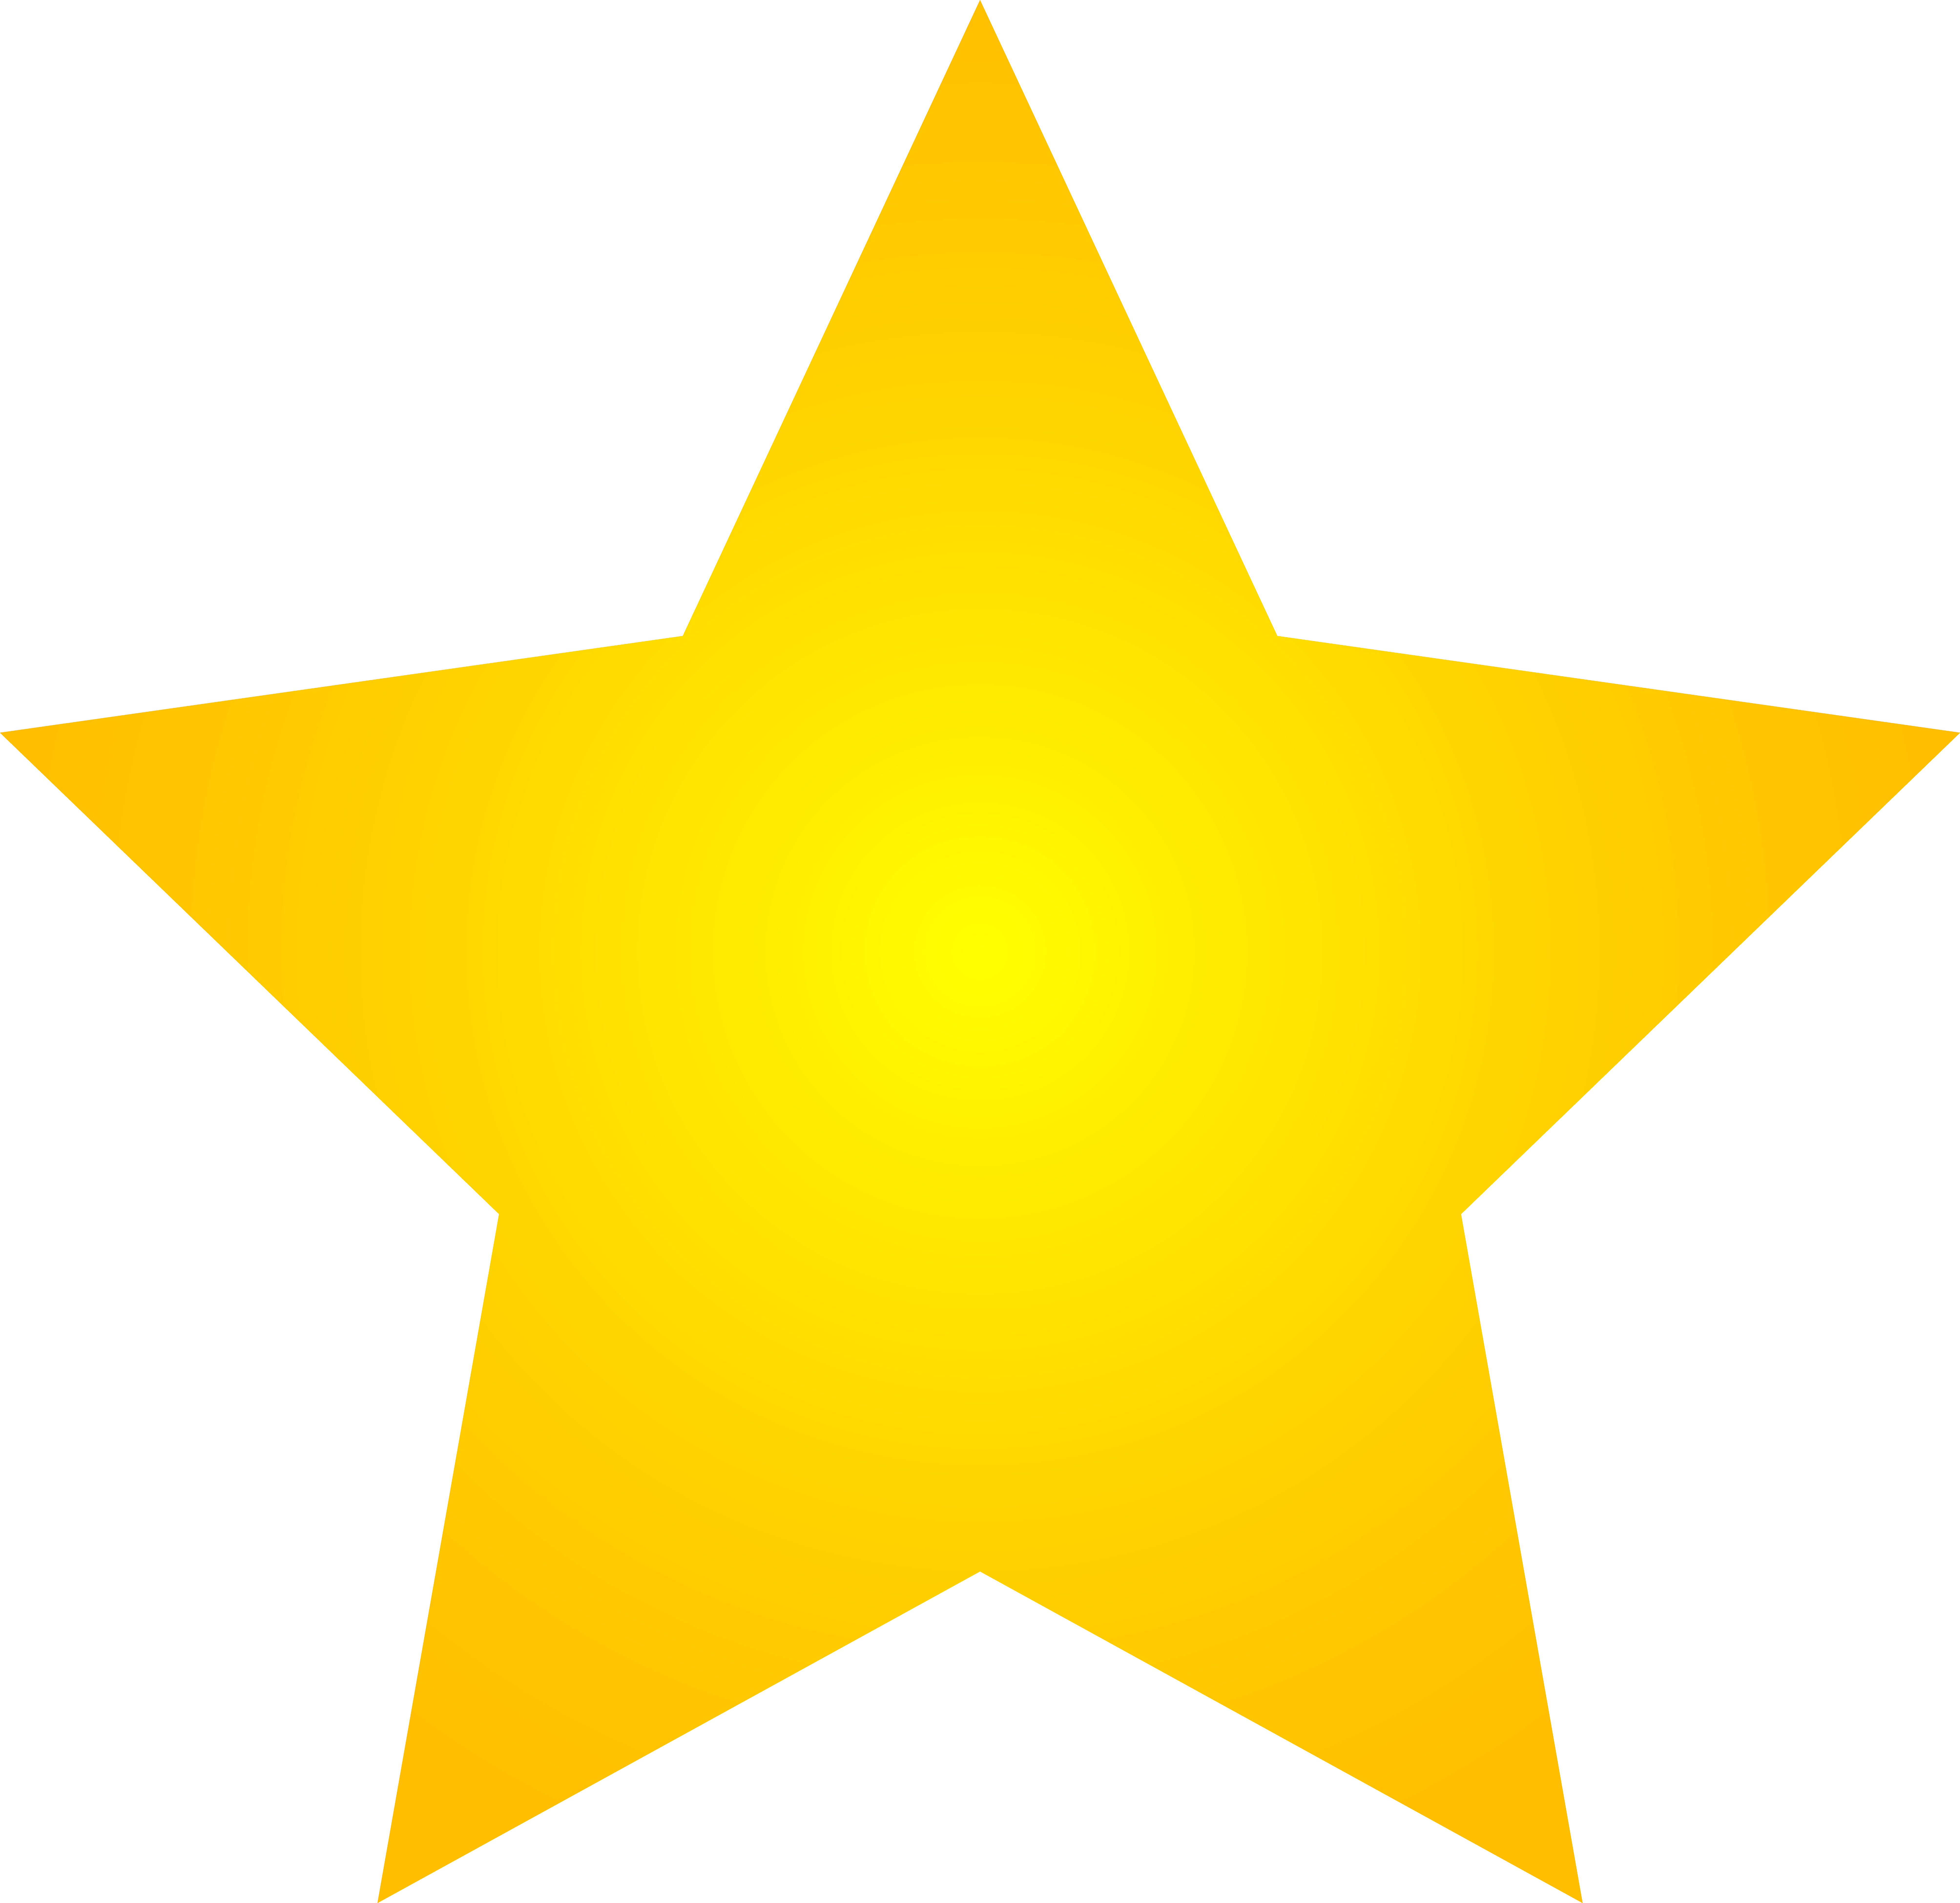 Gold Star Clipart | Clipart Panda - Free Clipart Images